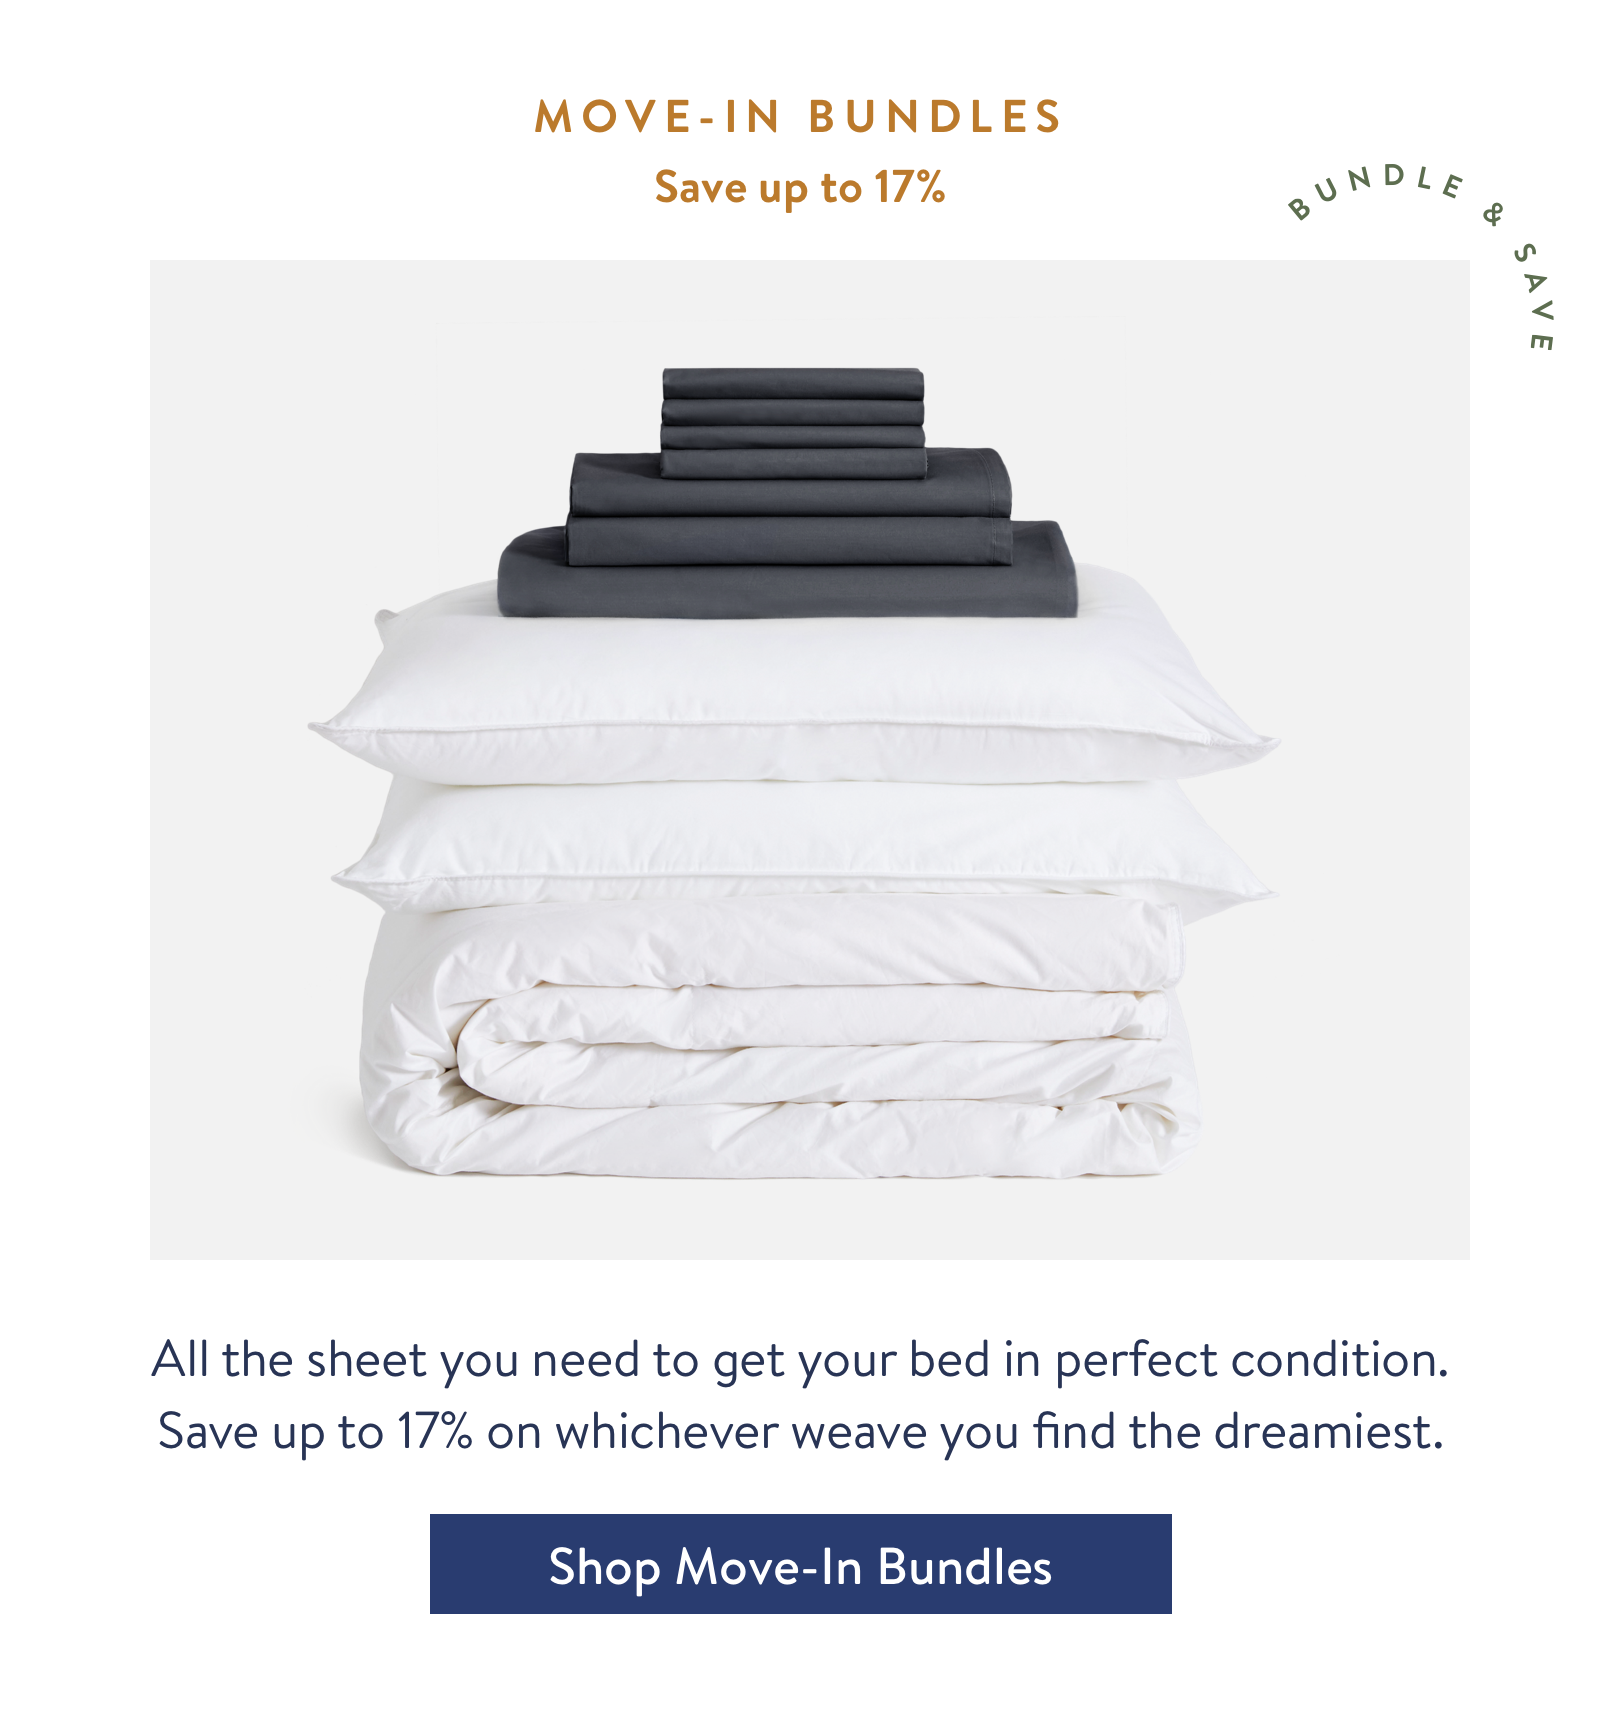 Move-In Bundles - All the sheet you need to get your bed in perfect condition. Save up to 25% on whichever weave you find the dreamiest.